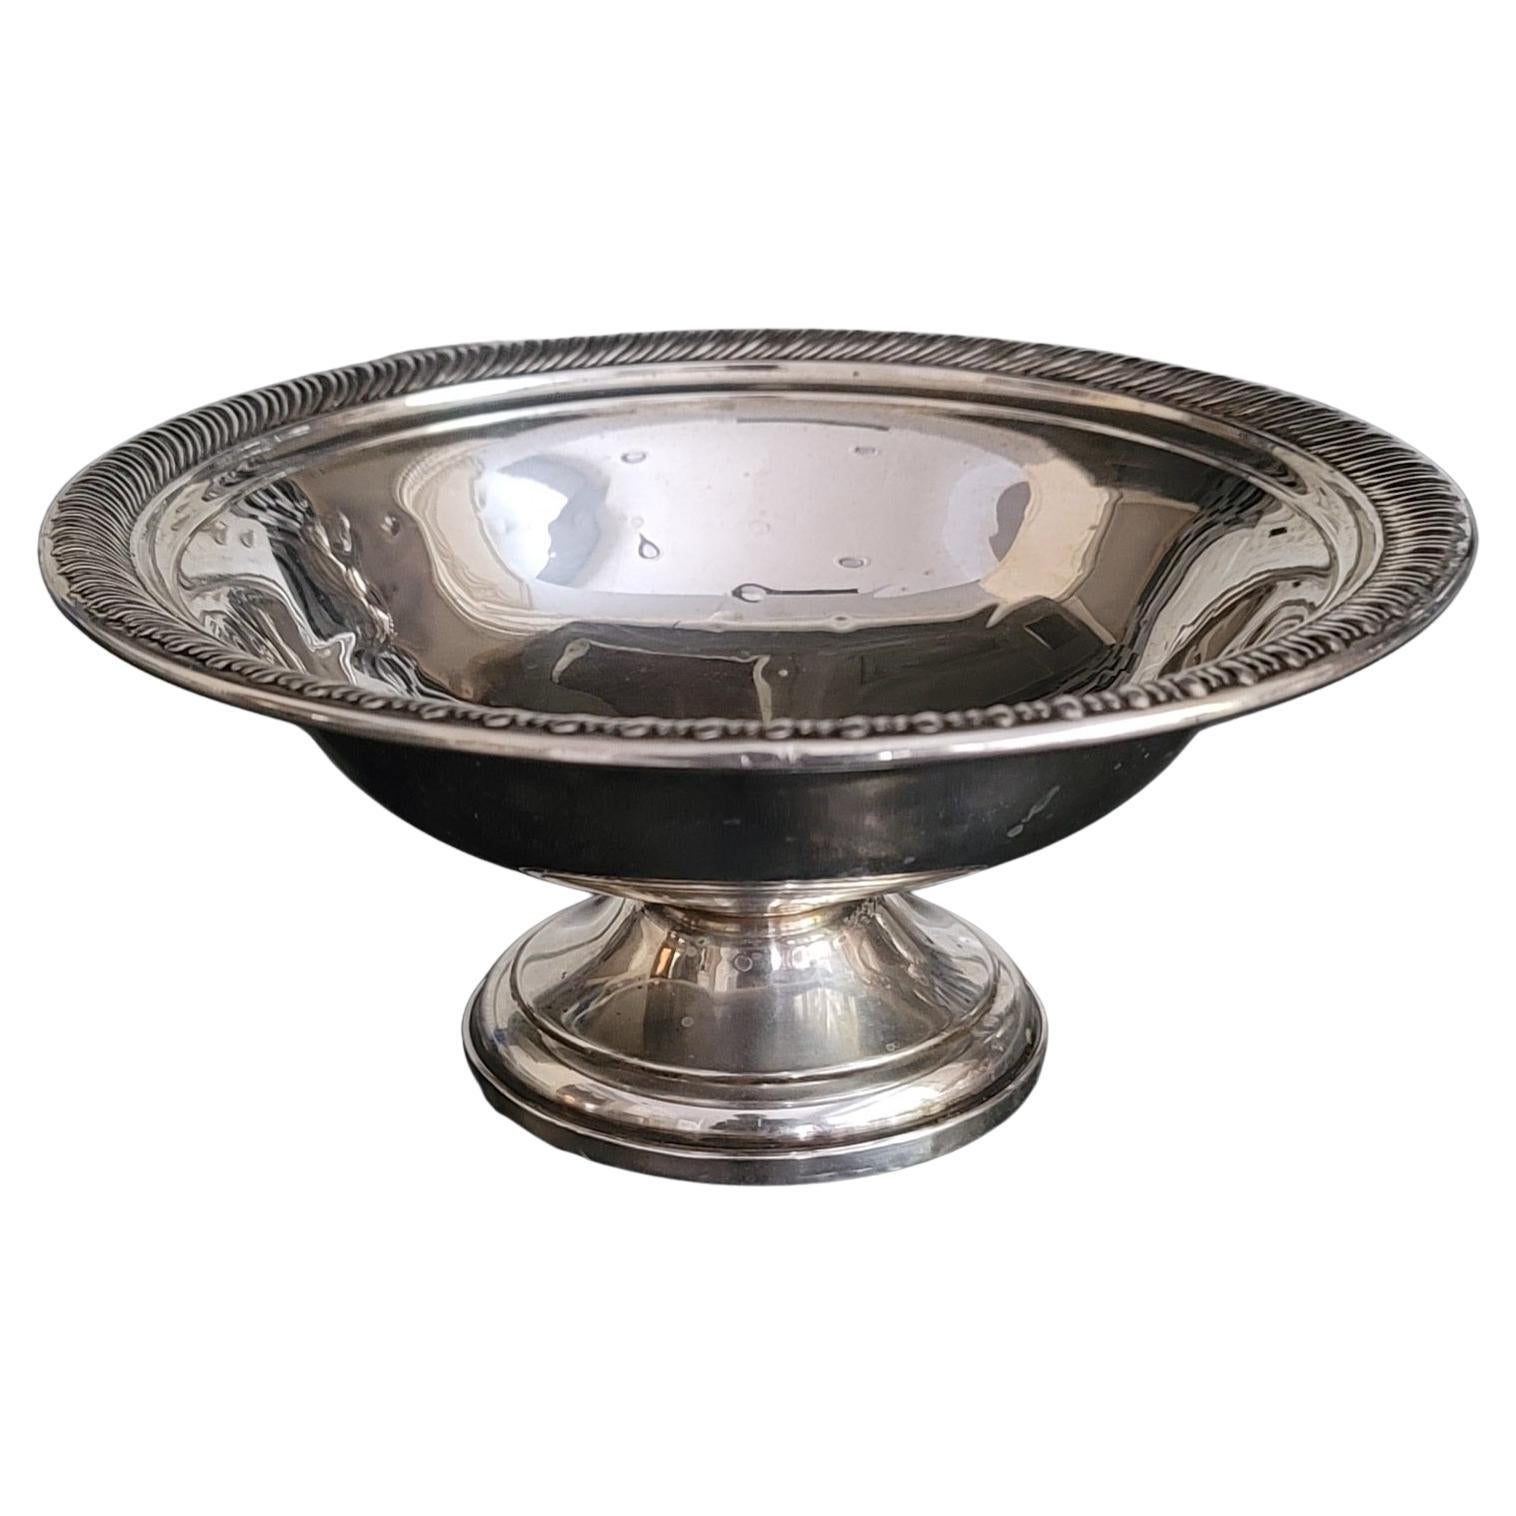 English Weighted Sterling Silver Compote or Candy Dish